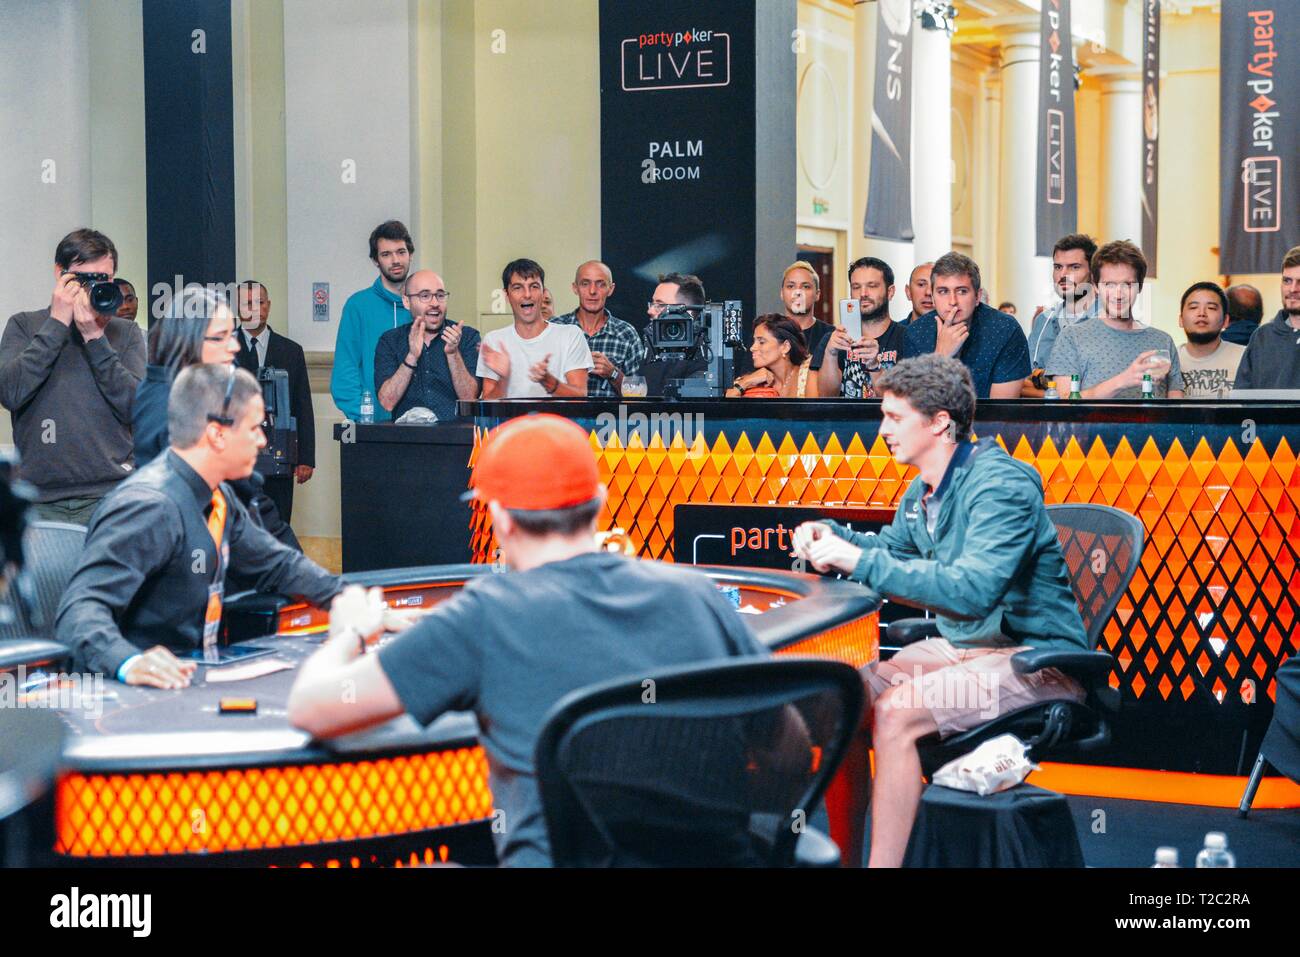 Rio de Janeiro, Brazil - March 25, 2019: Final table of the 2019 Partypoker LIVE MILLIONS South America festival at the luxurious Copacabana Palace Stock Photo